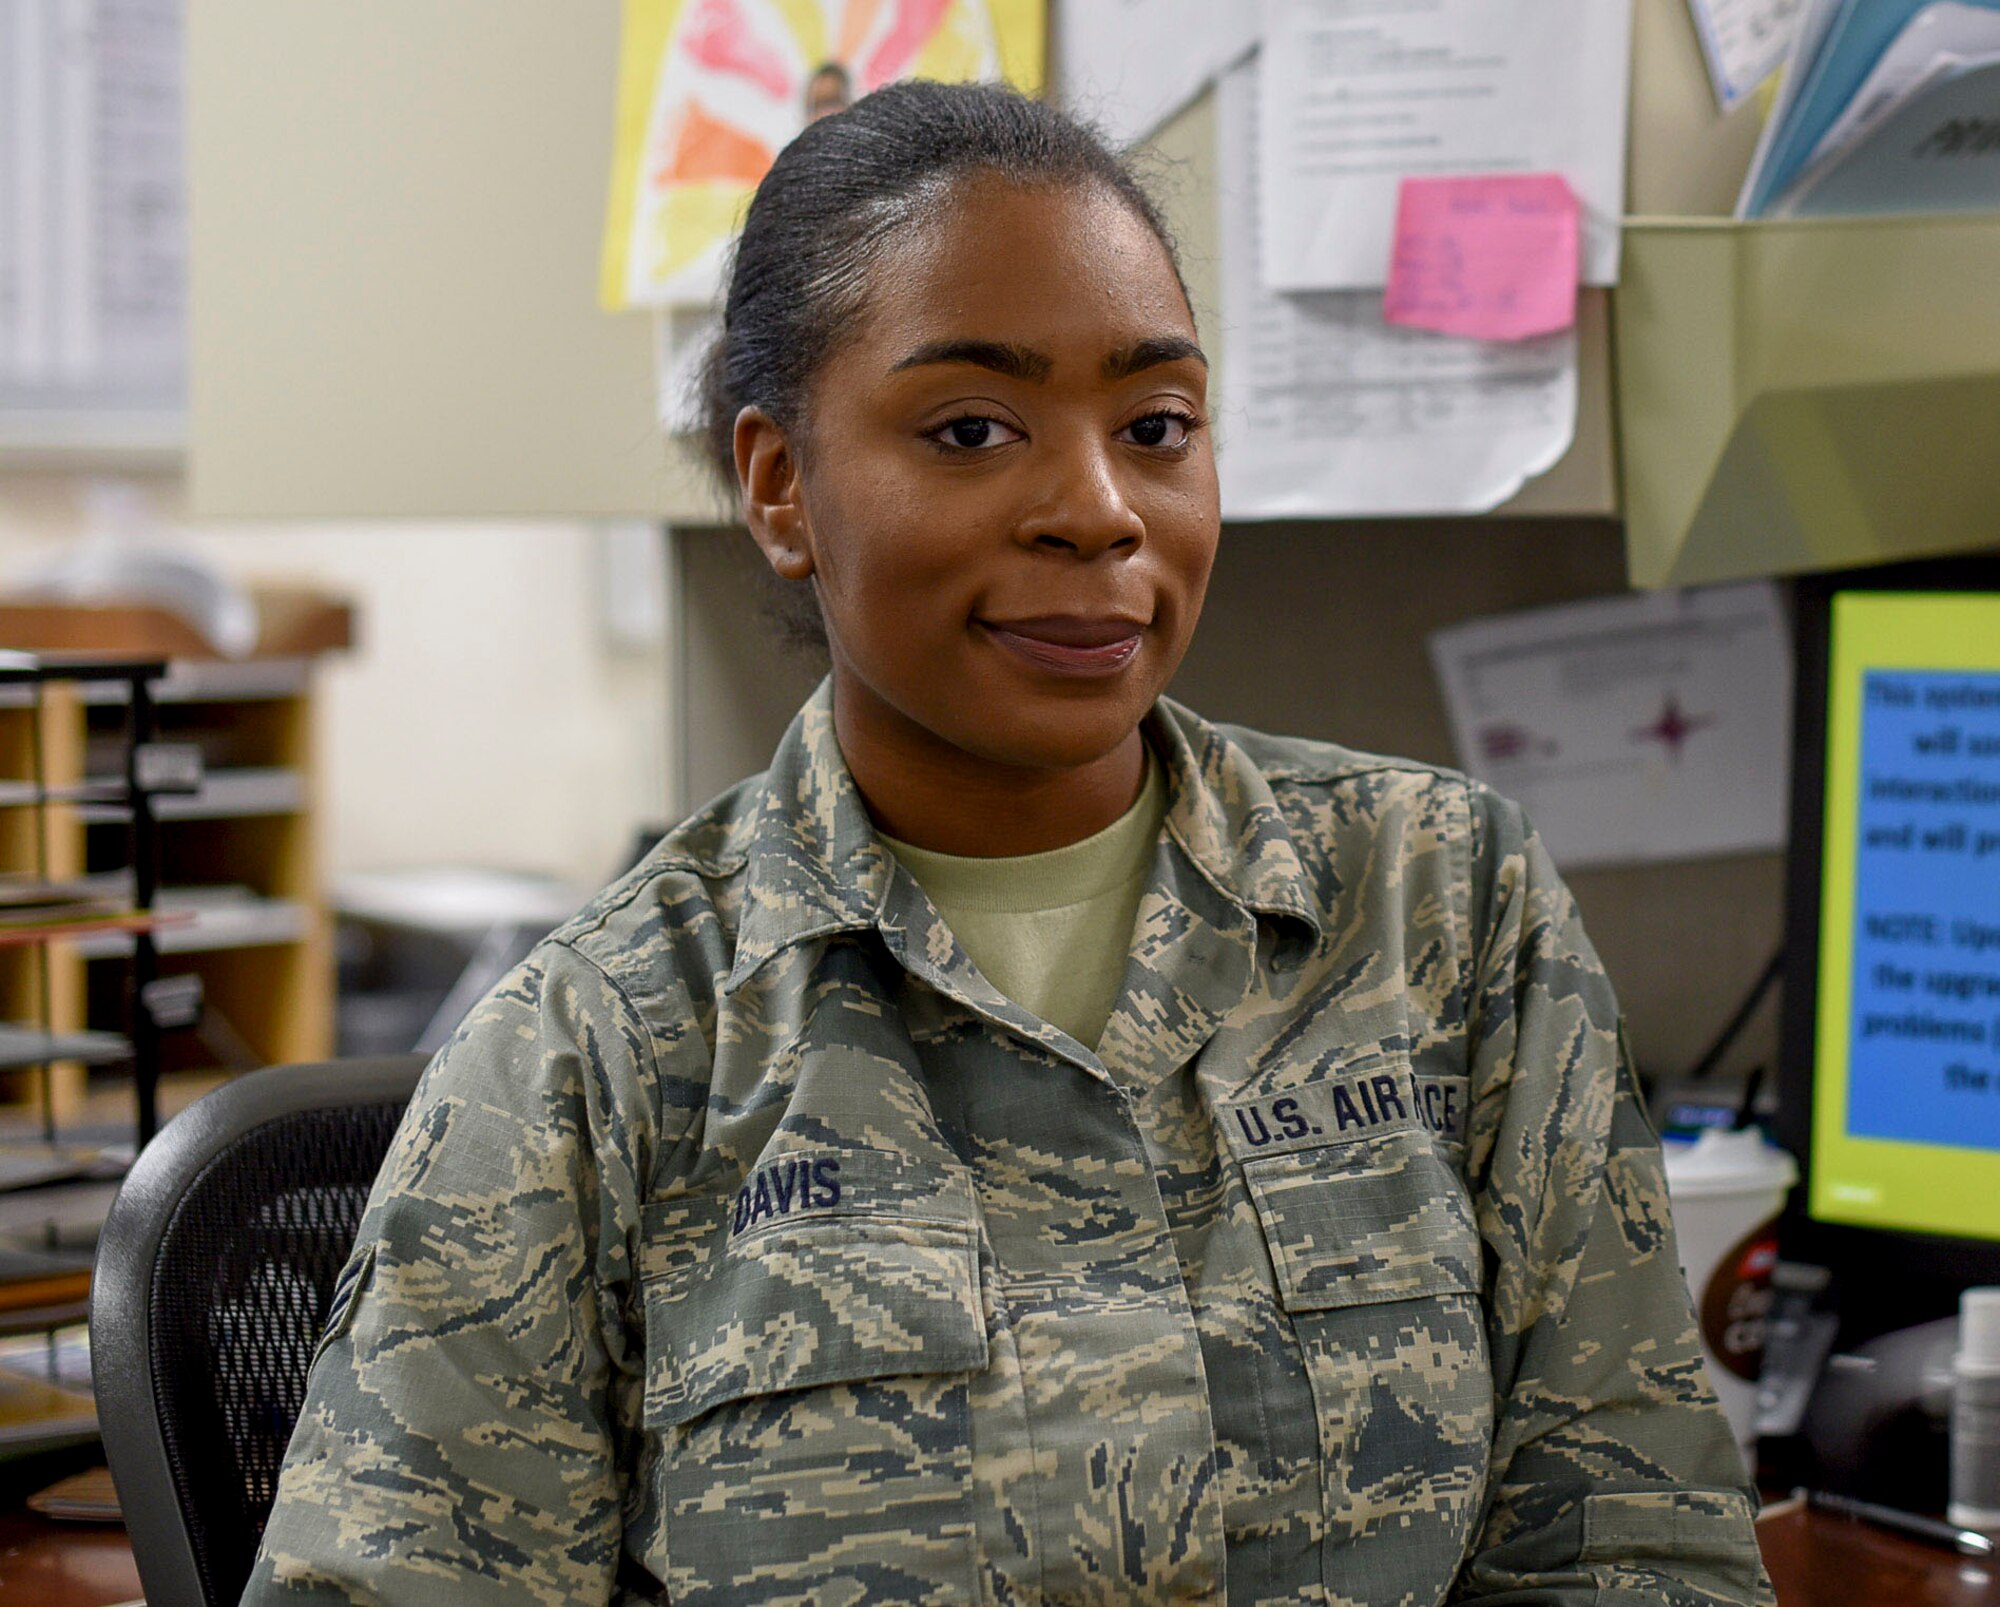 SrA JAndrea Davis, a 301st Force Support Squadron force management technician, shares why she joined the military and her career goals during an interview for a Spotlight feature November 29, 2018. The Spotlight series gives a behind-the-scenes look at the men and women who are the driving force of the 301st Fighter Wing. 
(U.S. Air Force photo by Airman 1st Class Brittany Morelock)